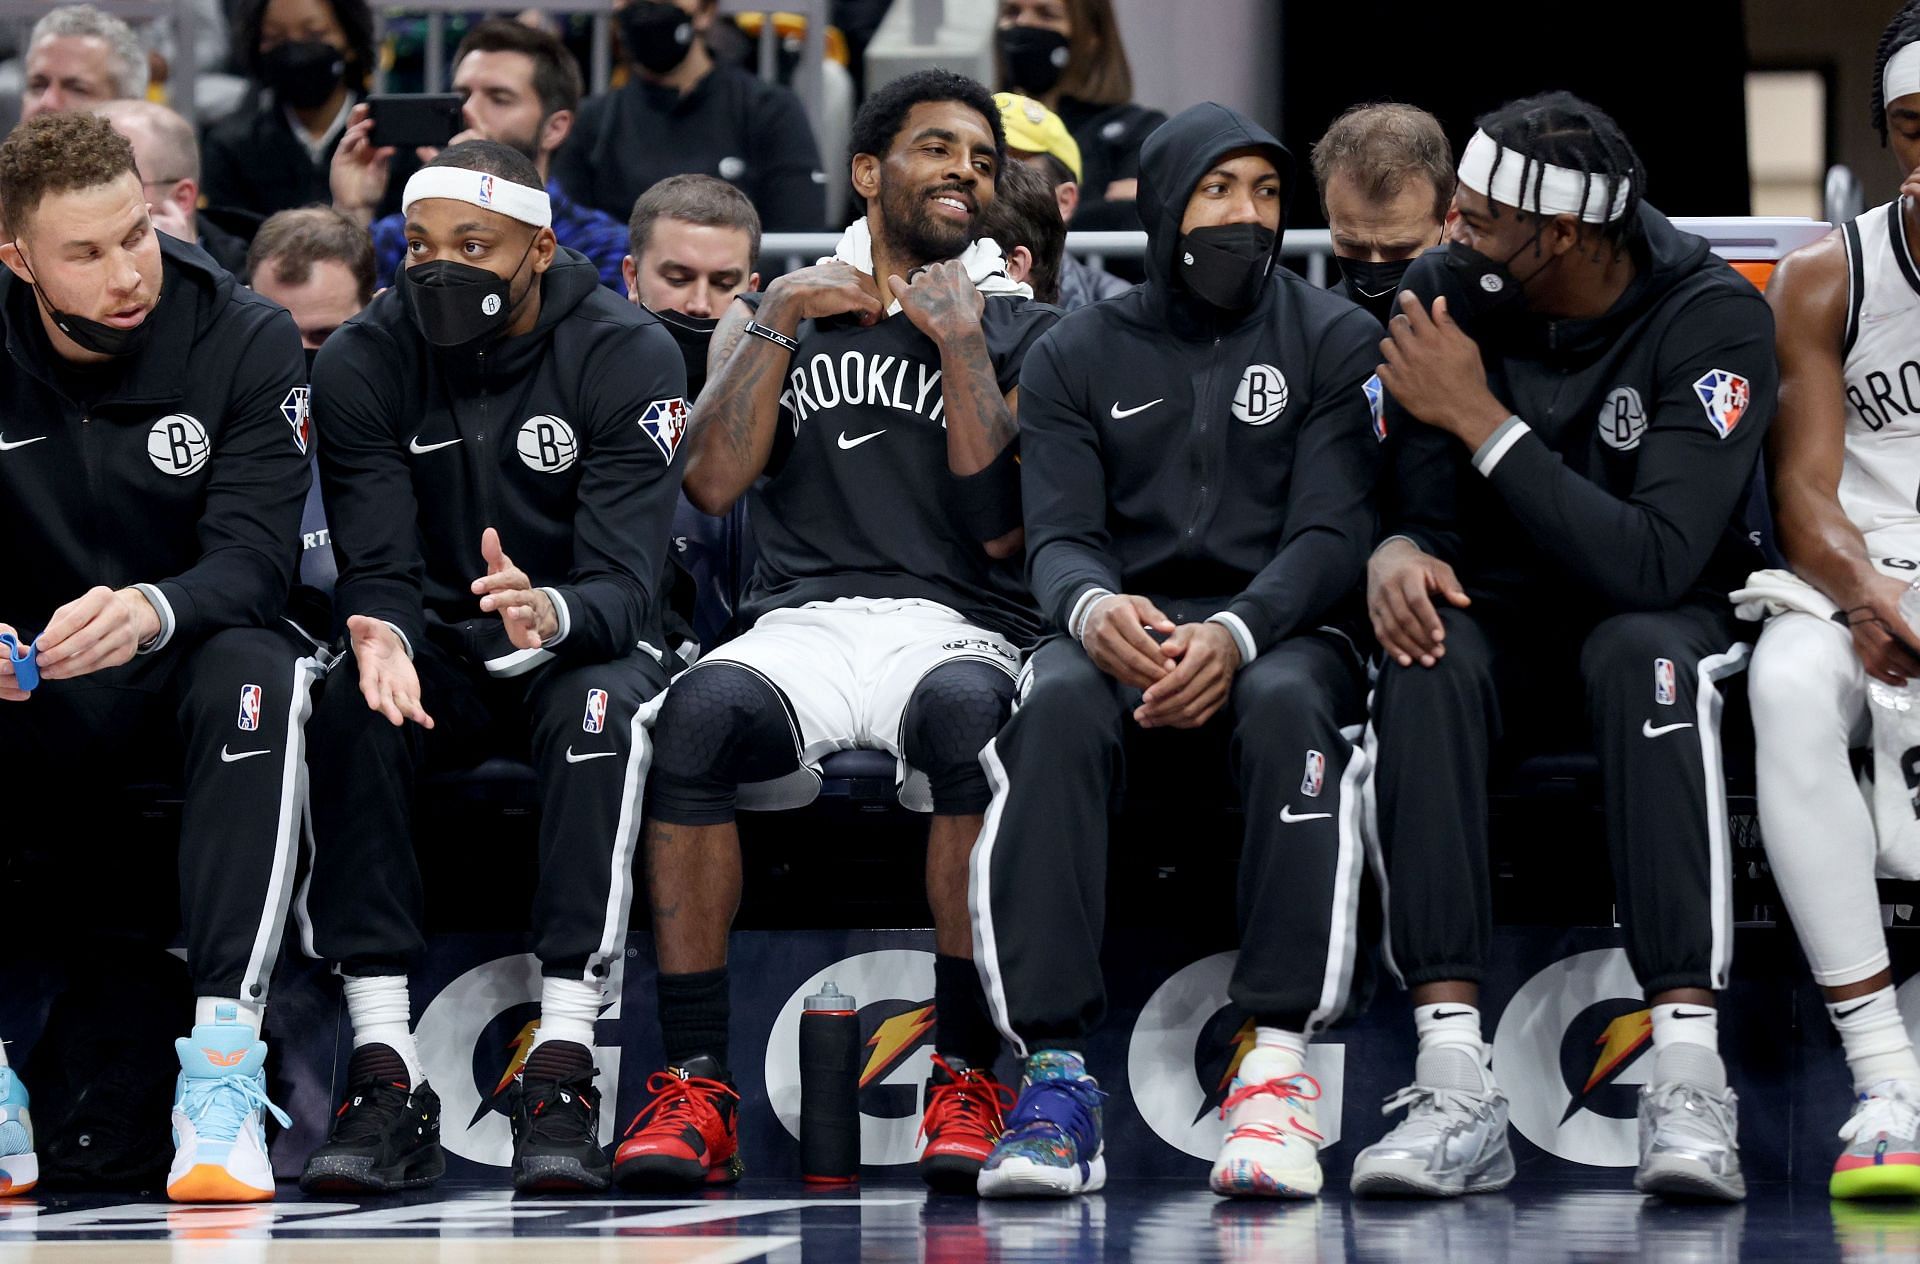 Brooklyn Nets secured their 26th win of the season over the Chicago Bulls.